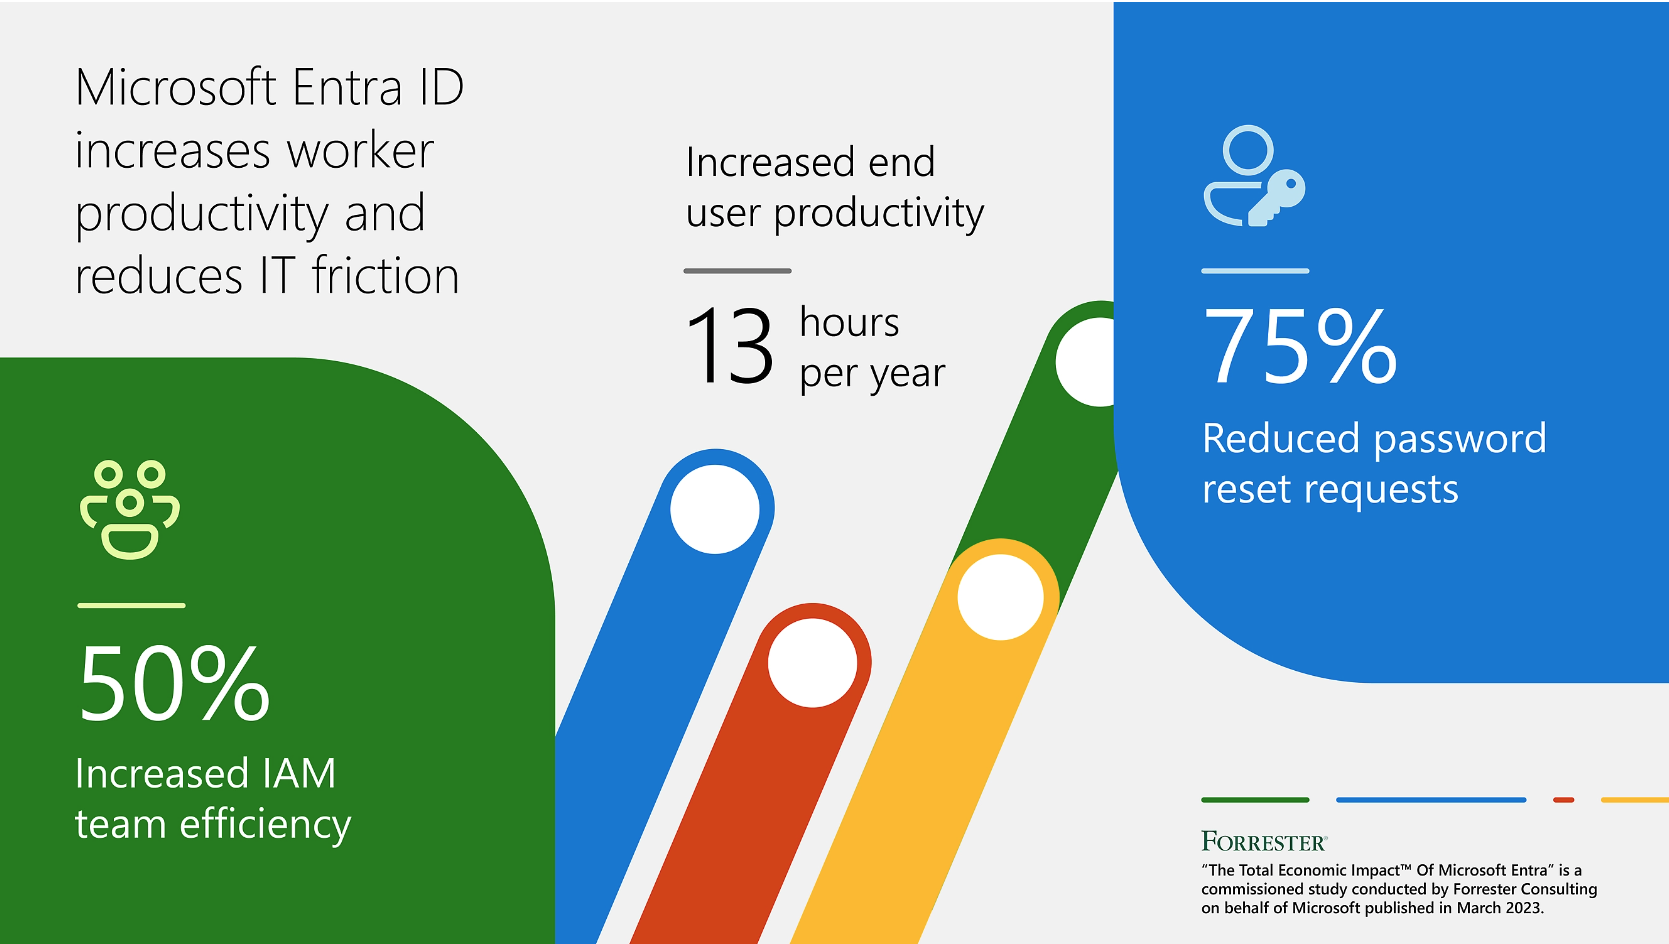 Discover the Total Economic Impact of Microsoft Entra